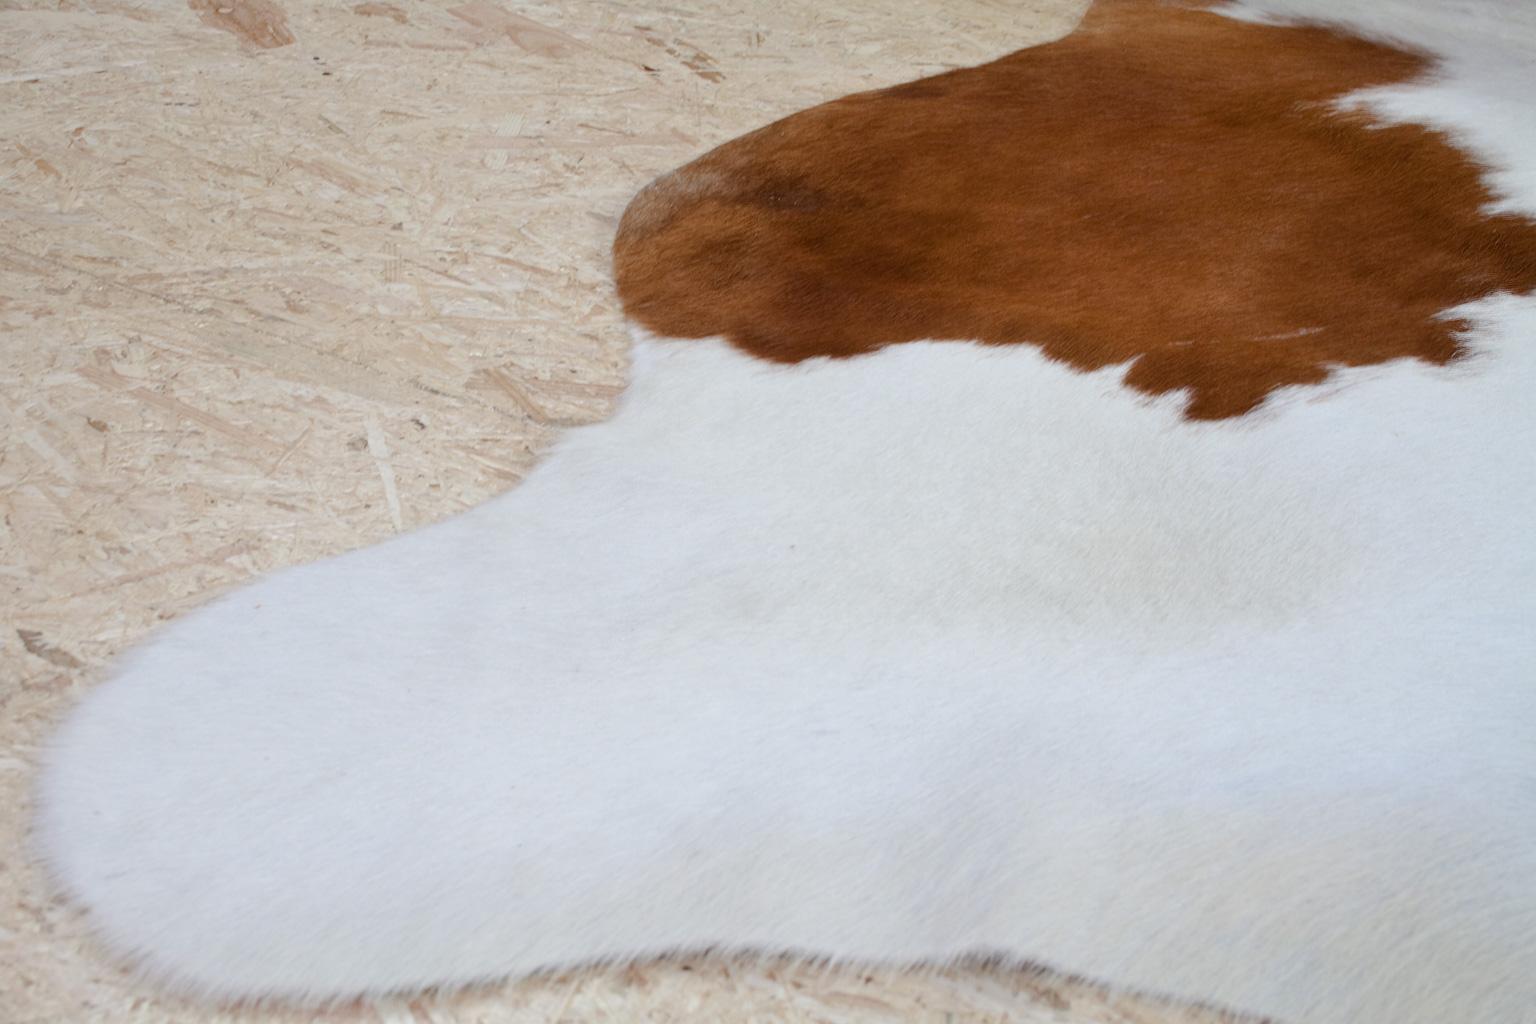 Organic Modern Natural White and Brown Cowhide or Rug, Dutch Cattle, 2018 2